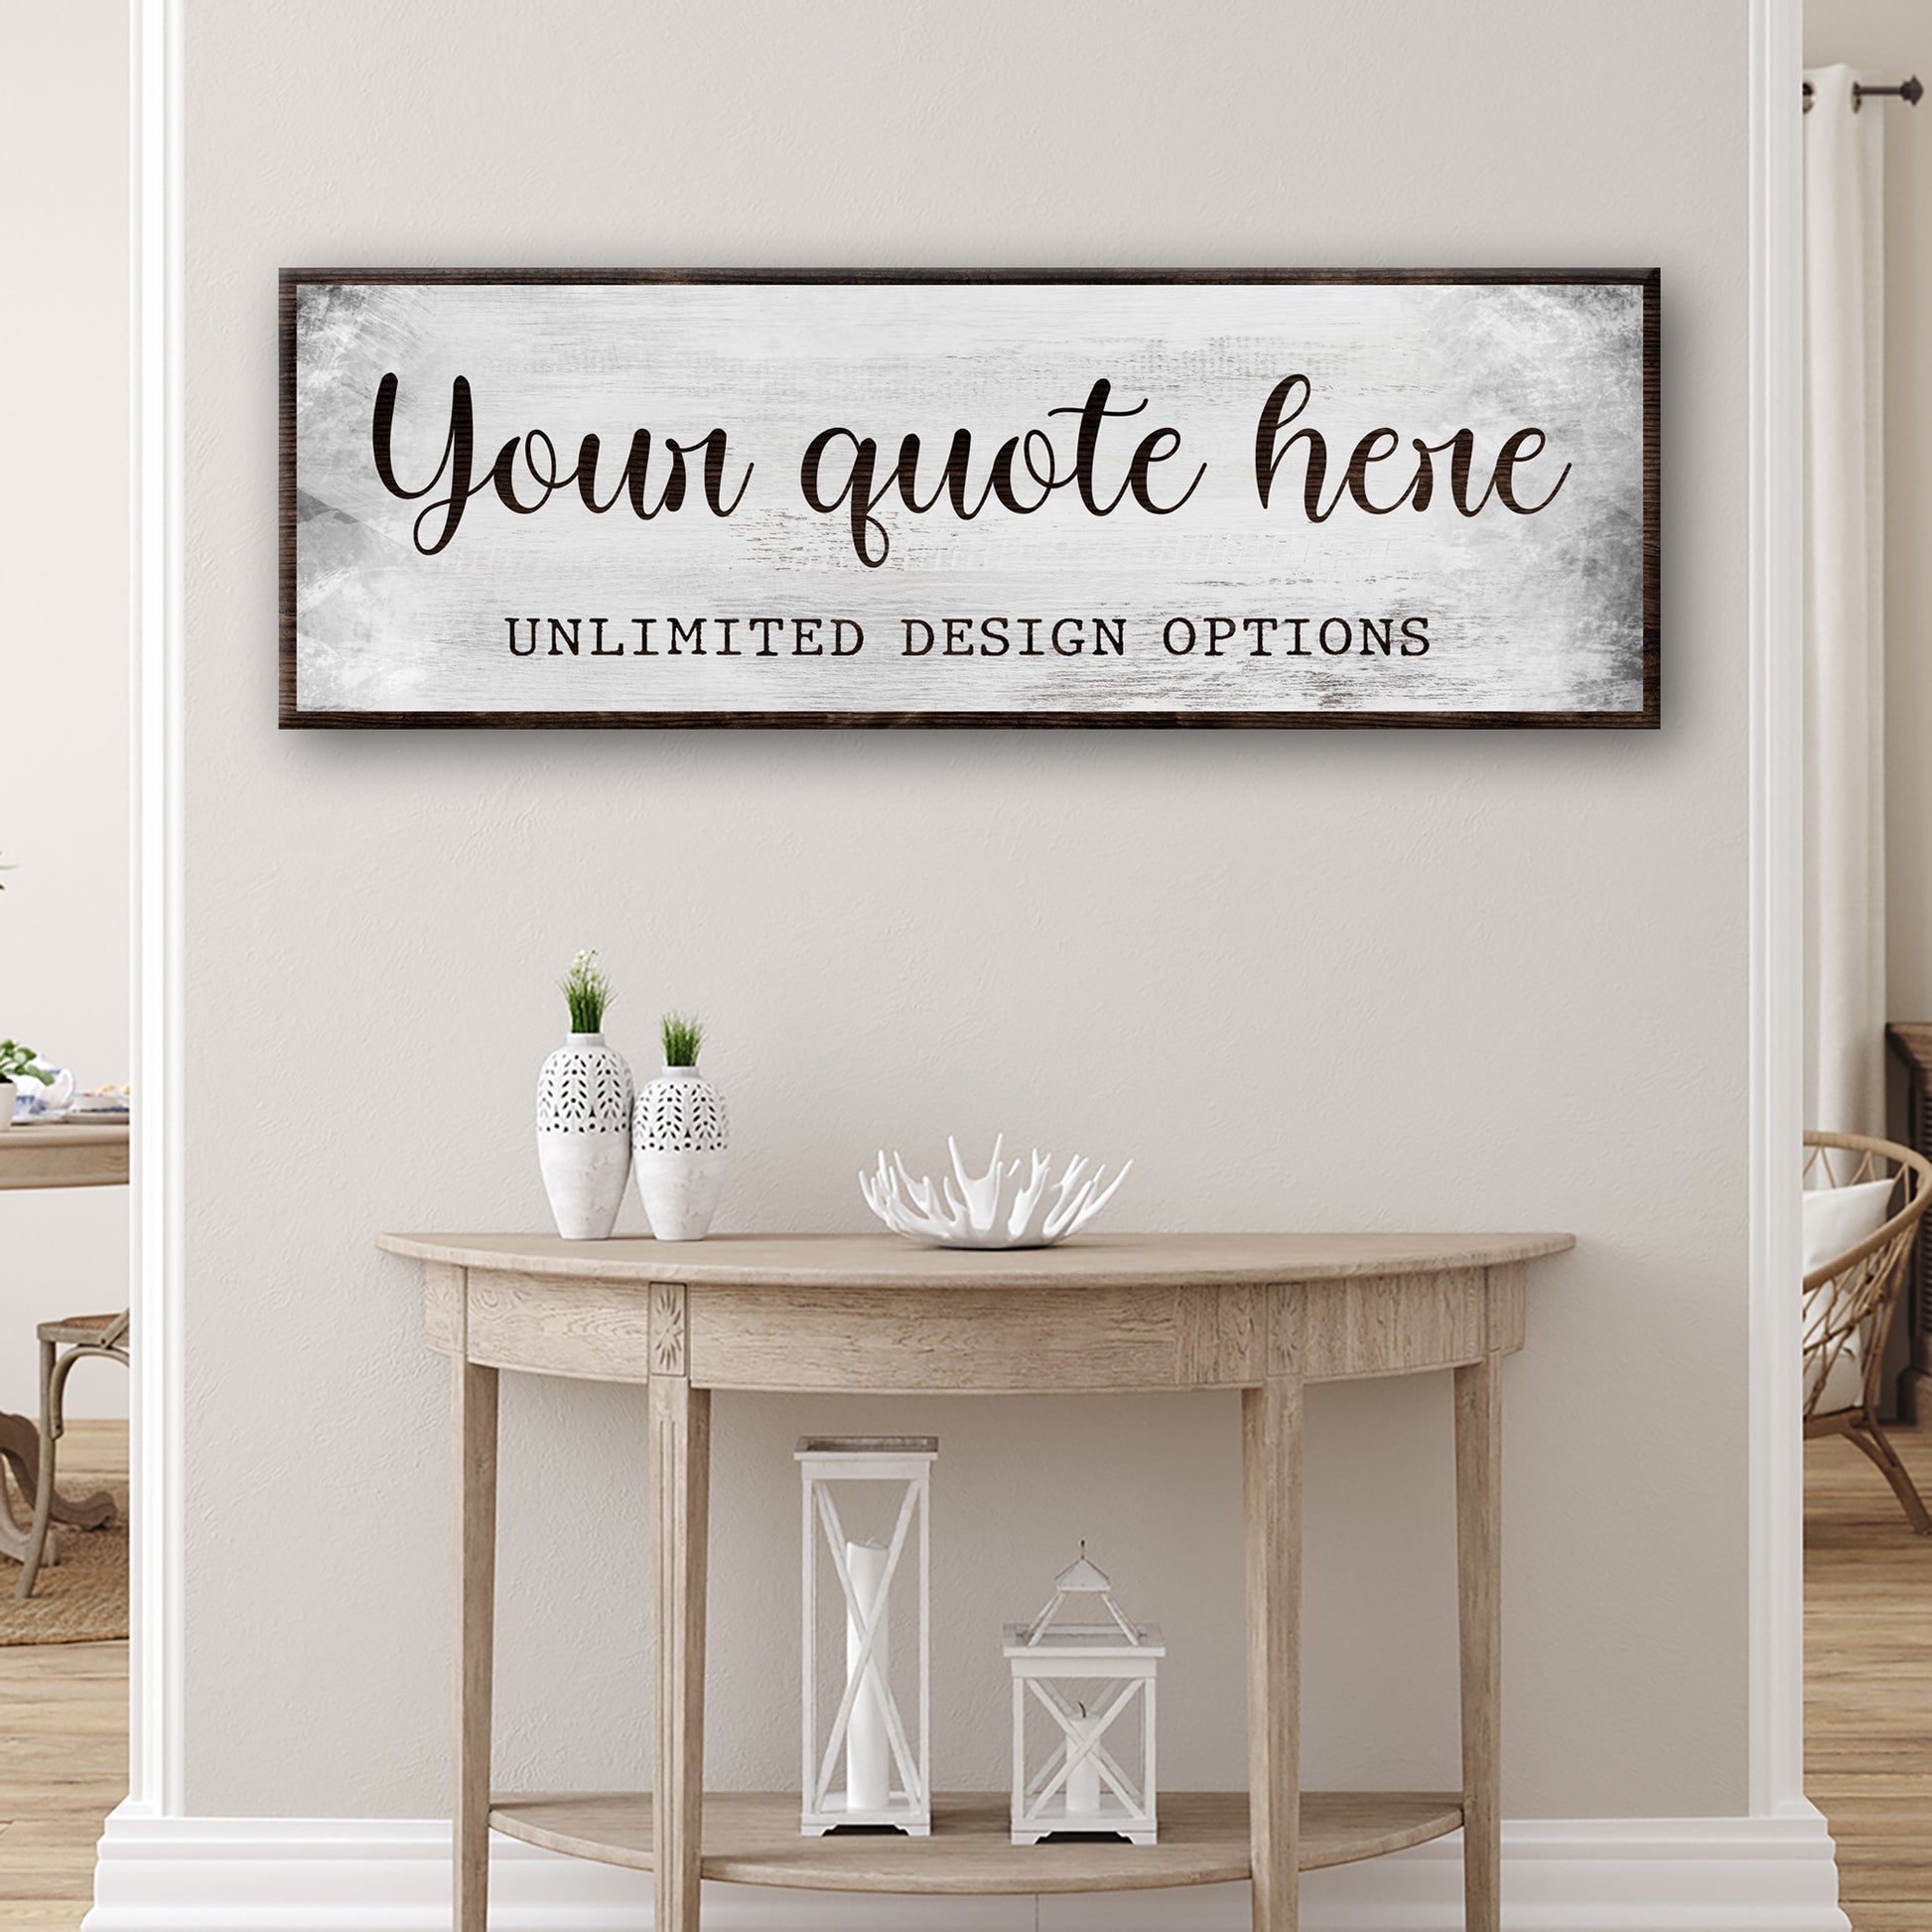 Custom Quote Sign - Image by Tailored Canvases